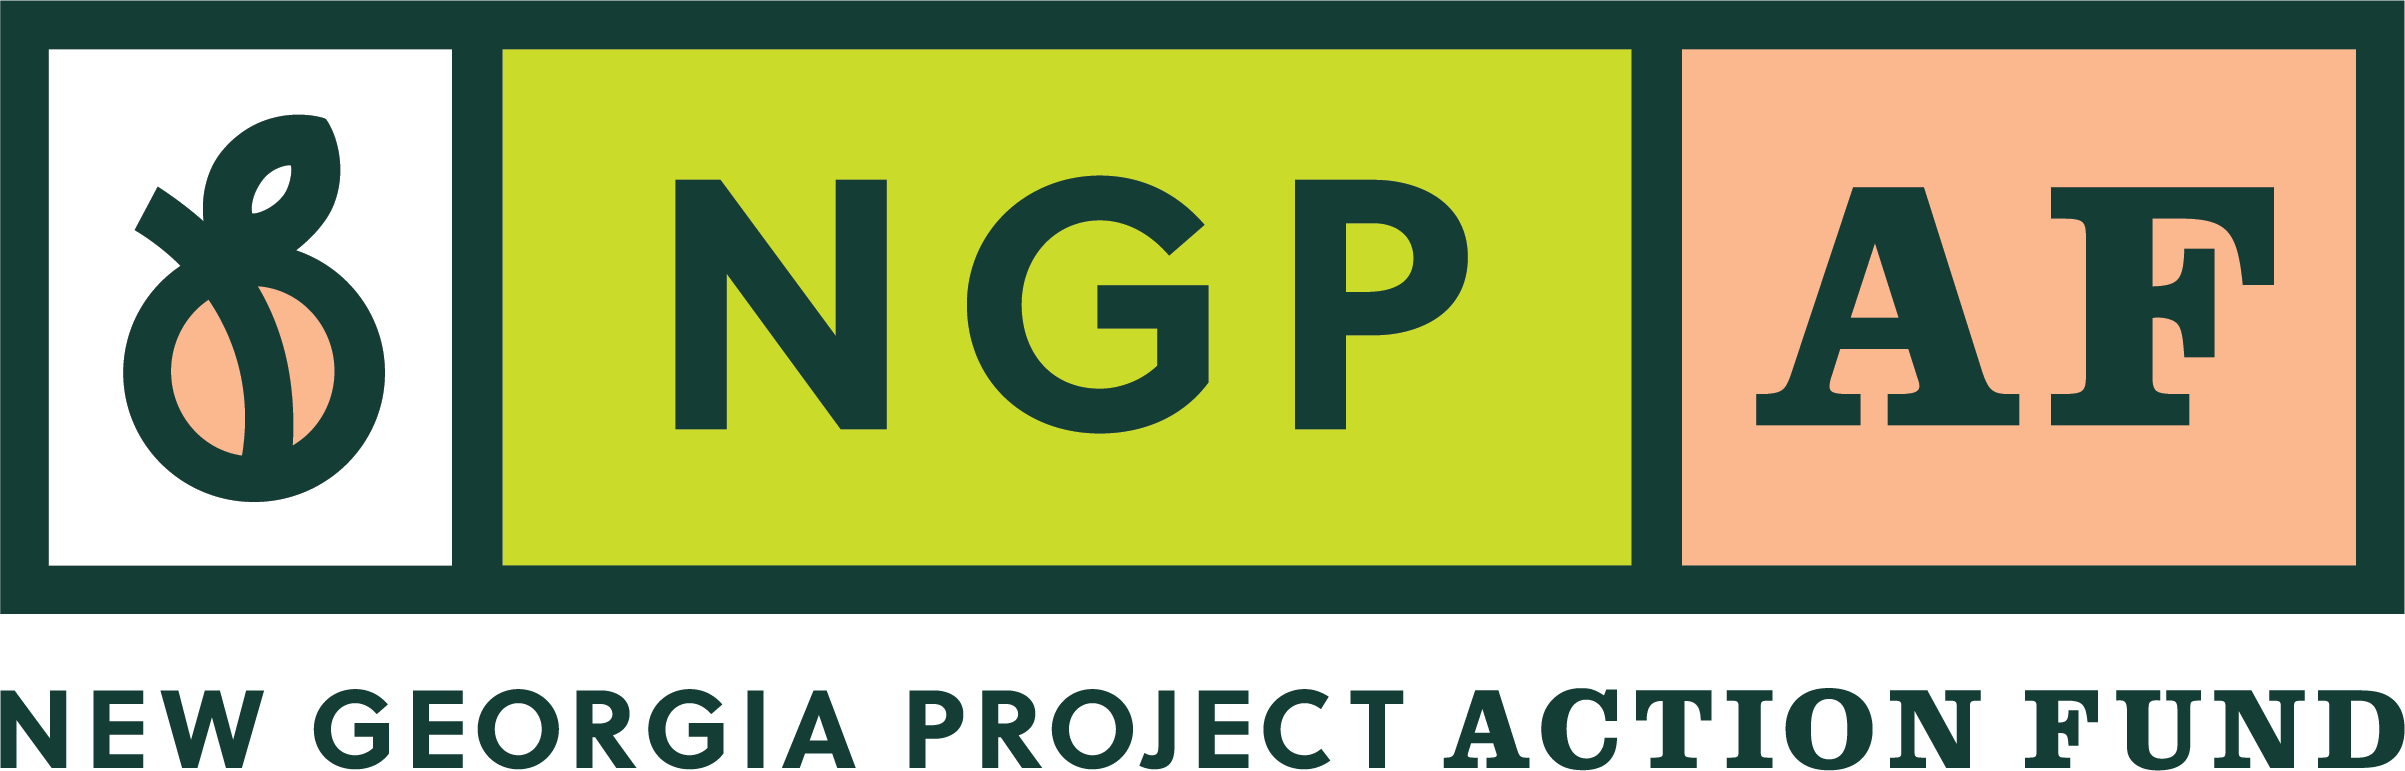 The New Georgia Project Action Fund